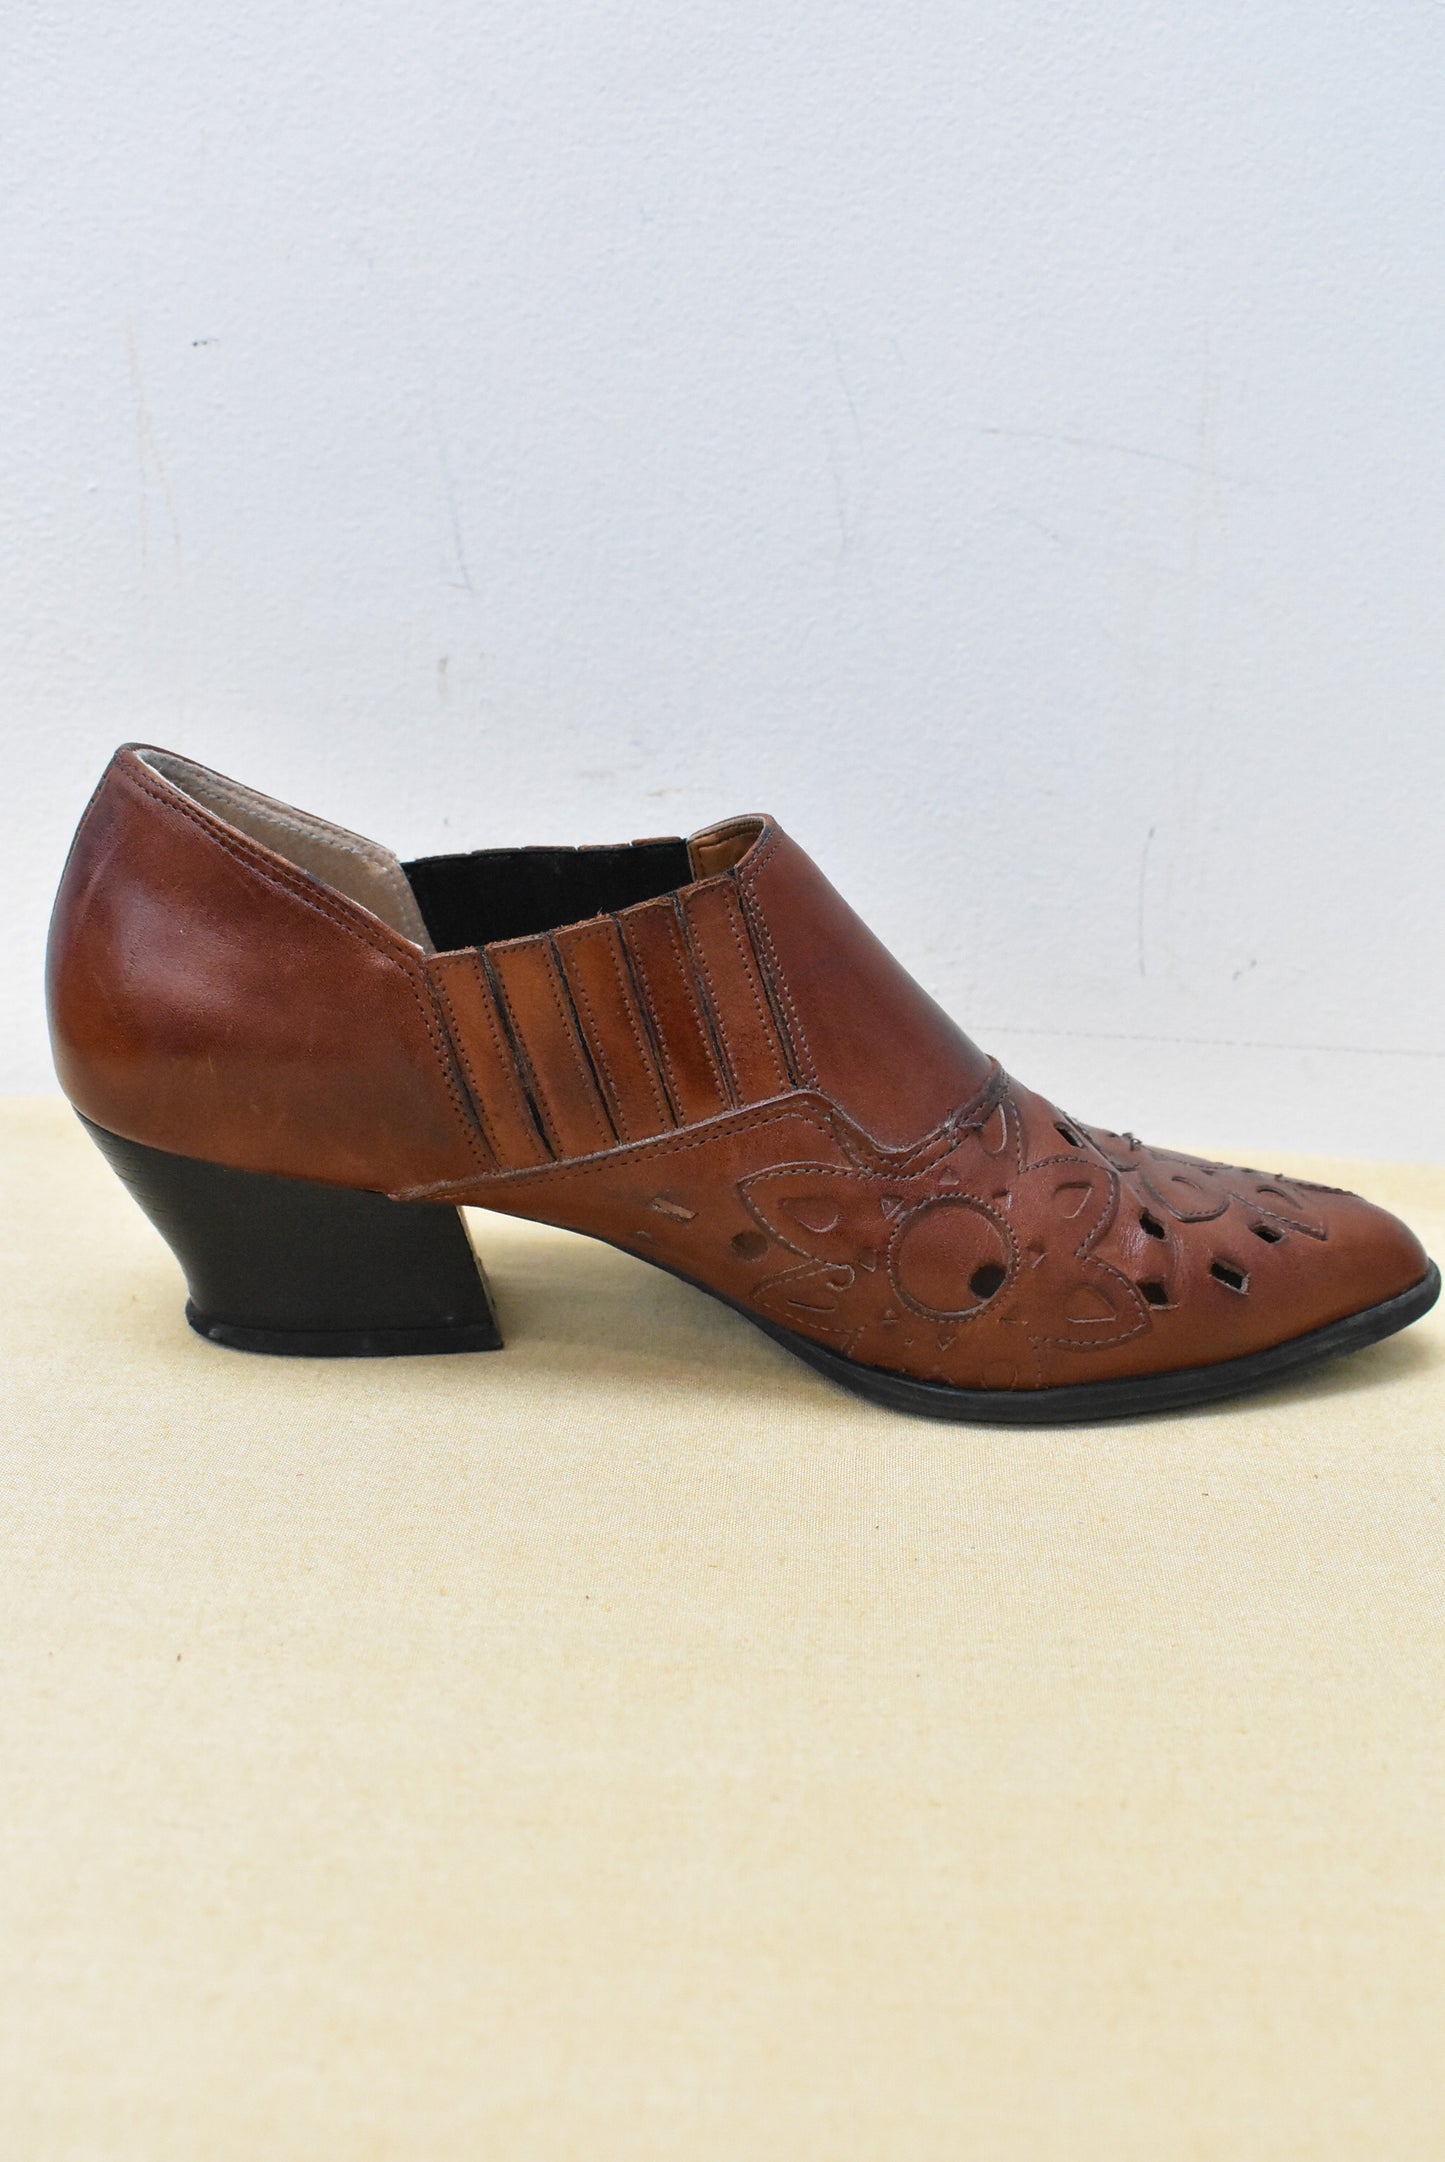 Martorell brown leather NZ-designed shoes, 25.5cm